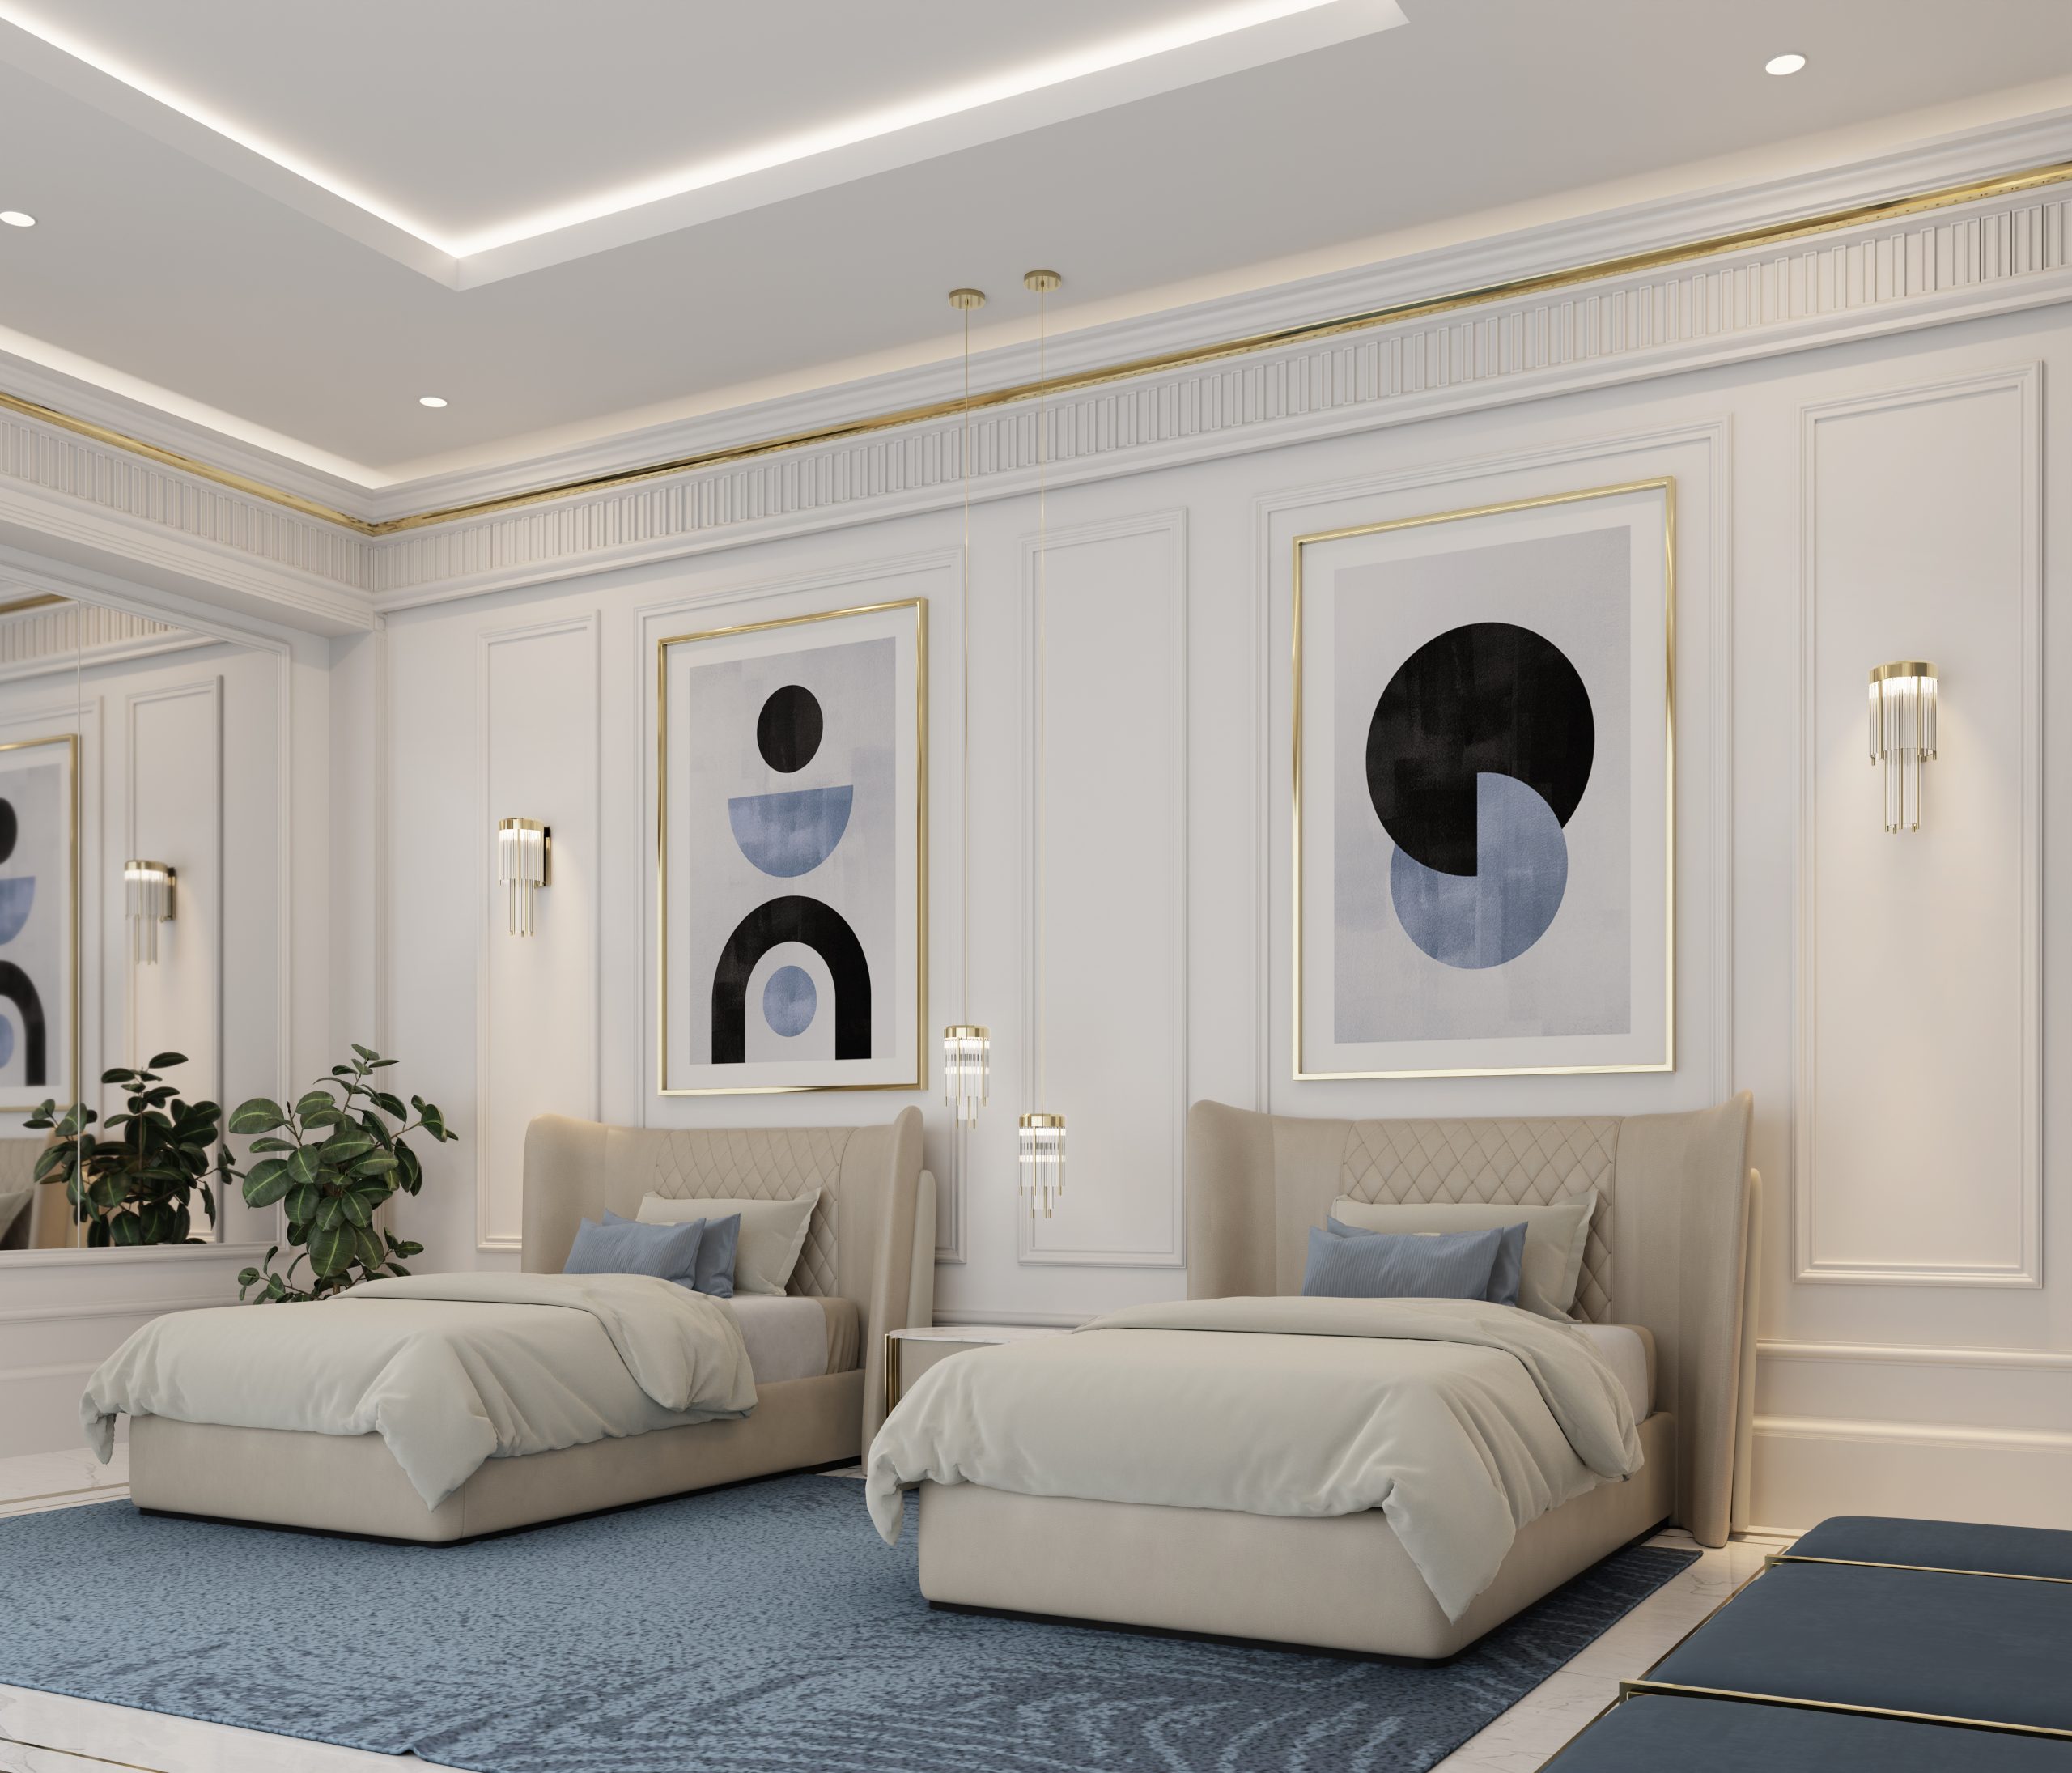 Bedroom Design Ideas From Qatar That Will Leave You In Awe!